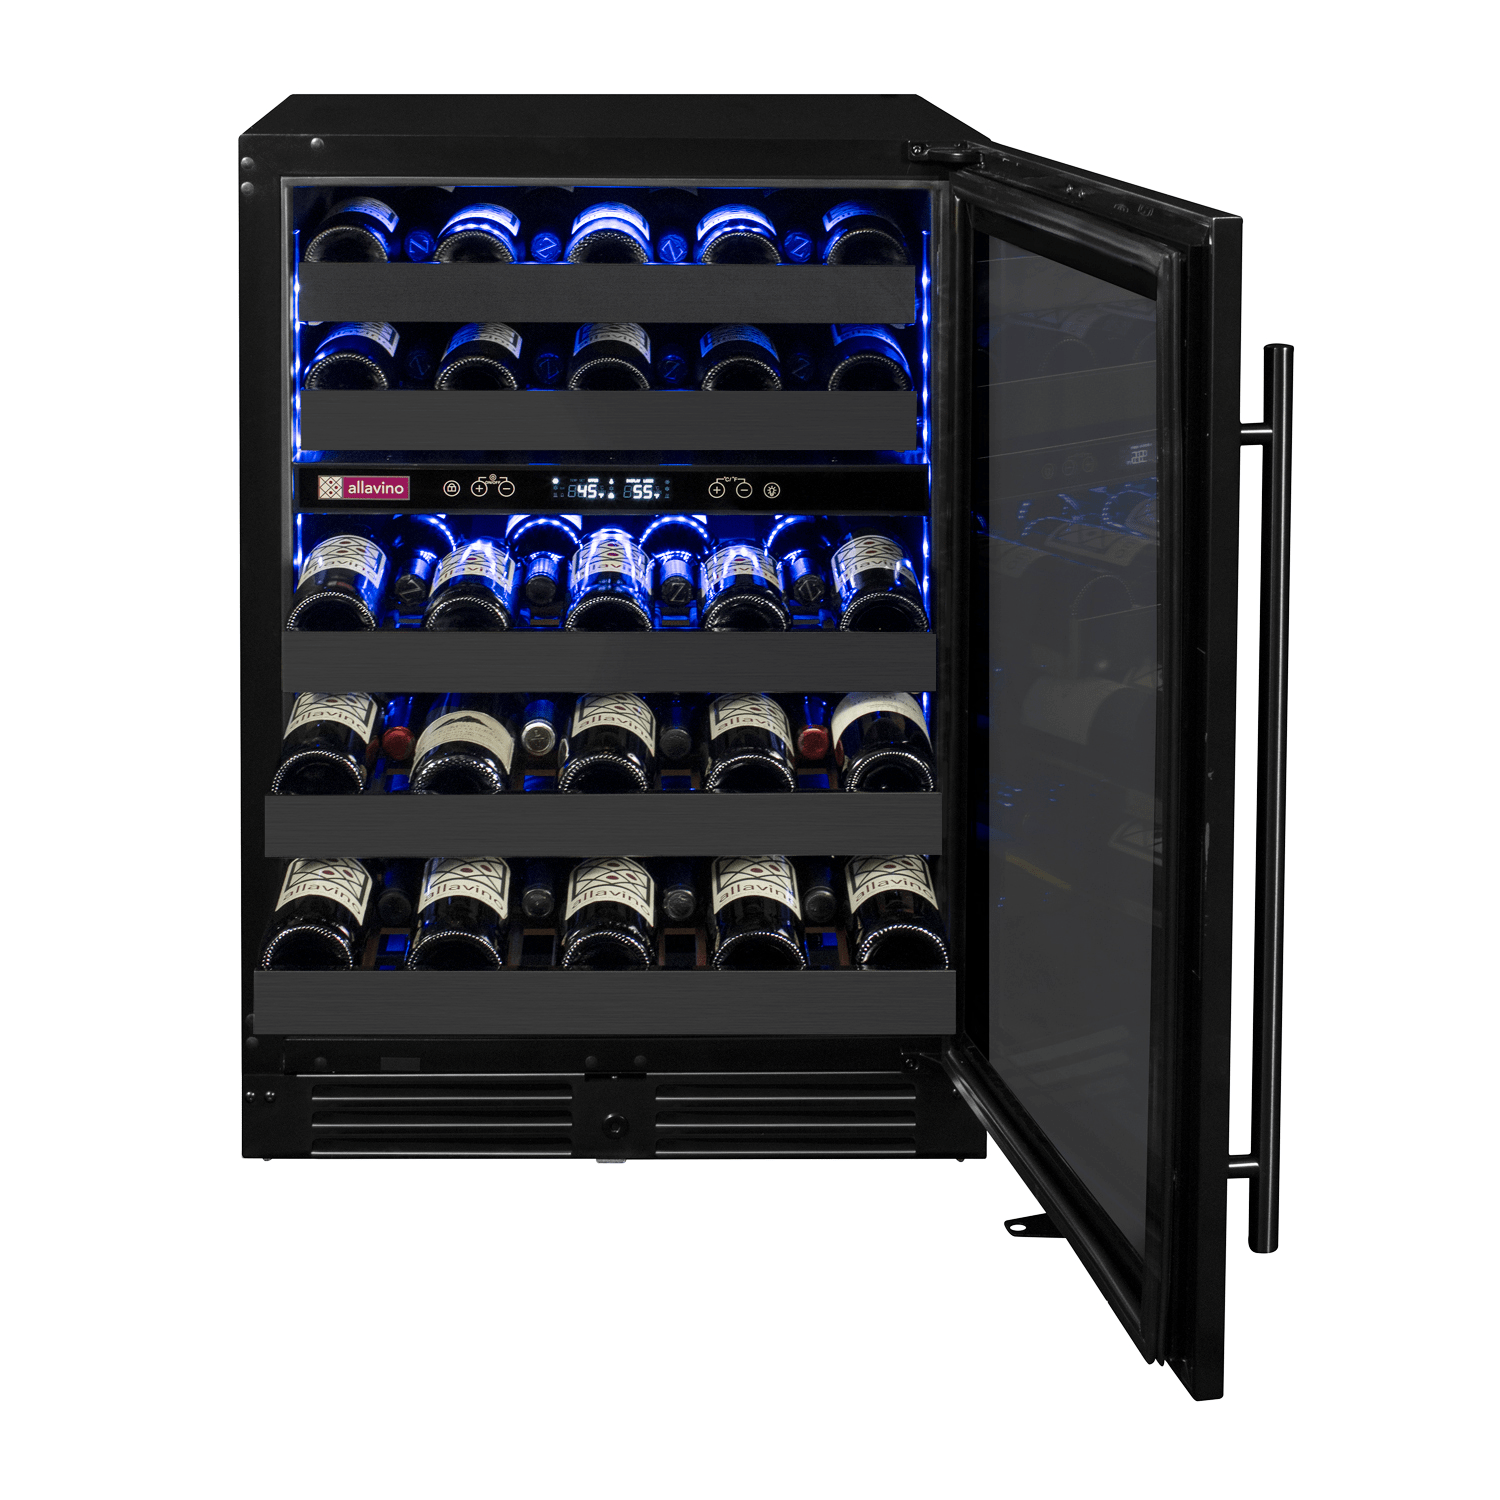 Allavino Reserva 50 Bottle Dual Zone Right Hinge Wine Refrigerator BDW5034D-2BSR Wine Coolers BDW5034D-2BSR Luxury Appliances Direct